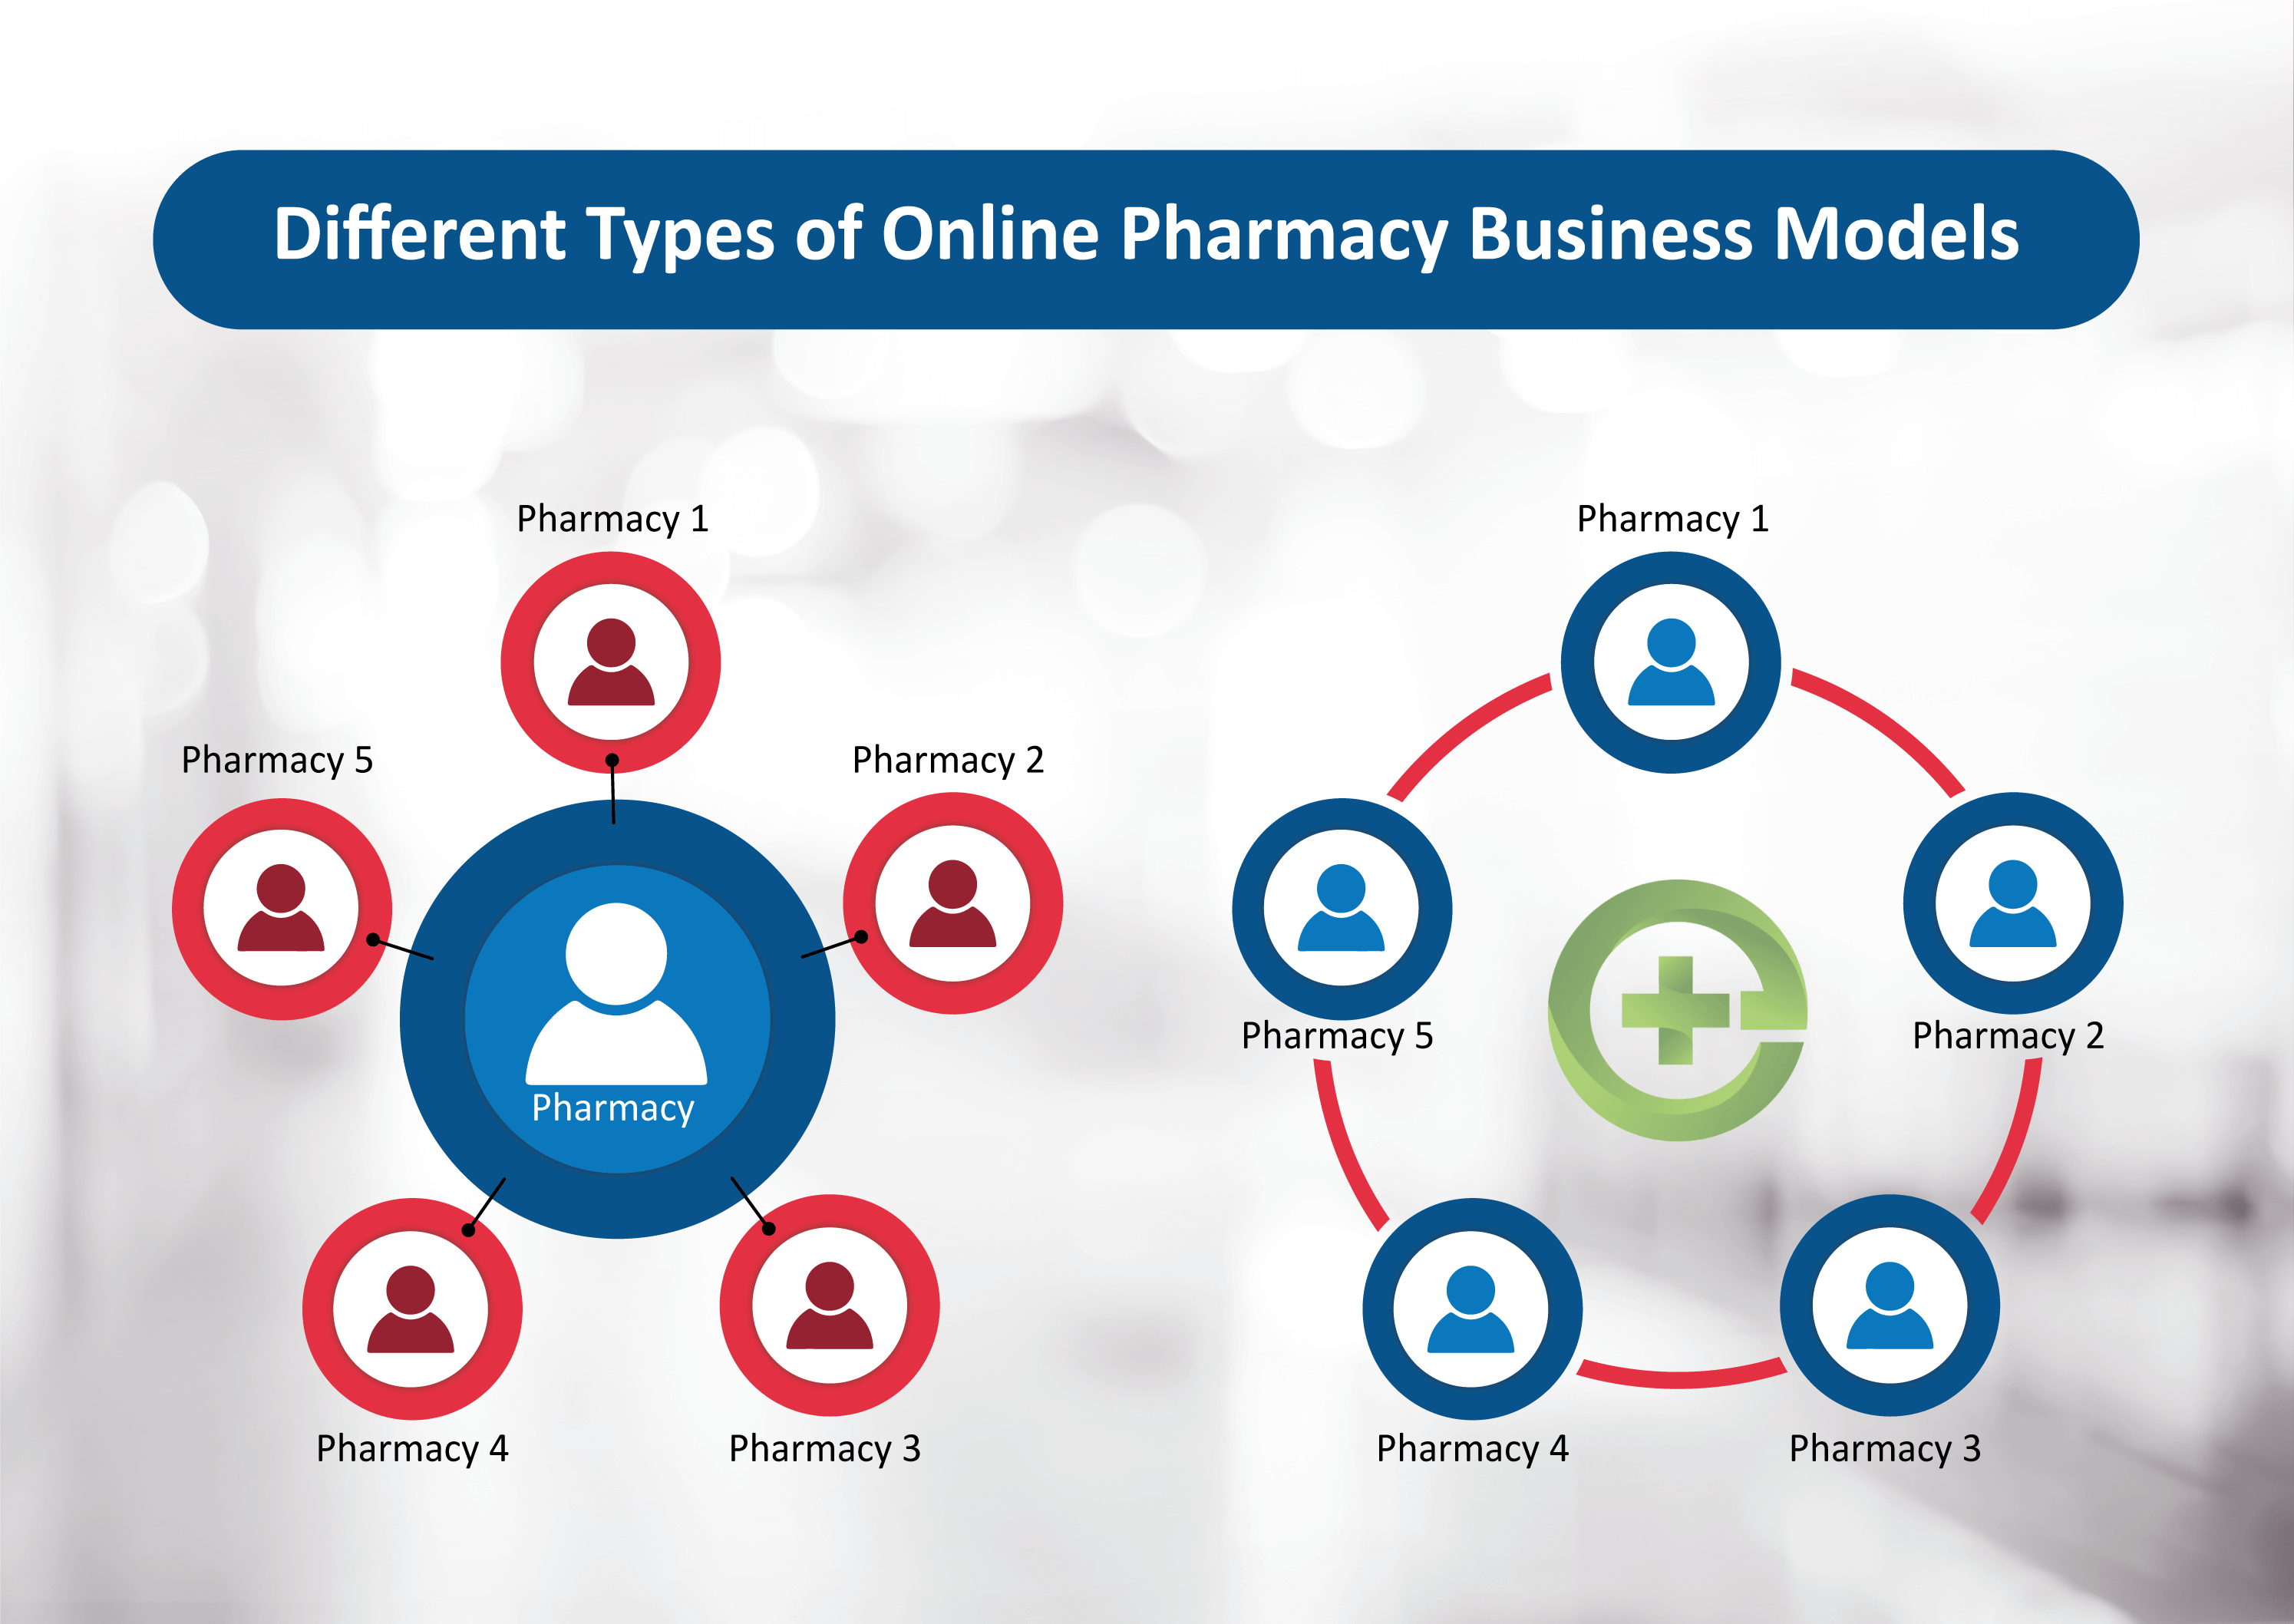 Different Types of Online Pharmacy Business Models